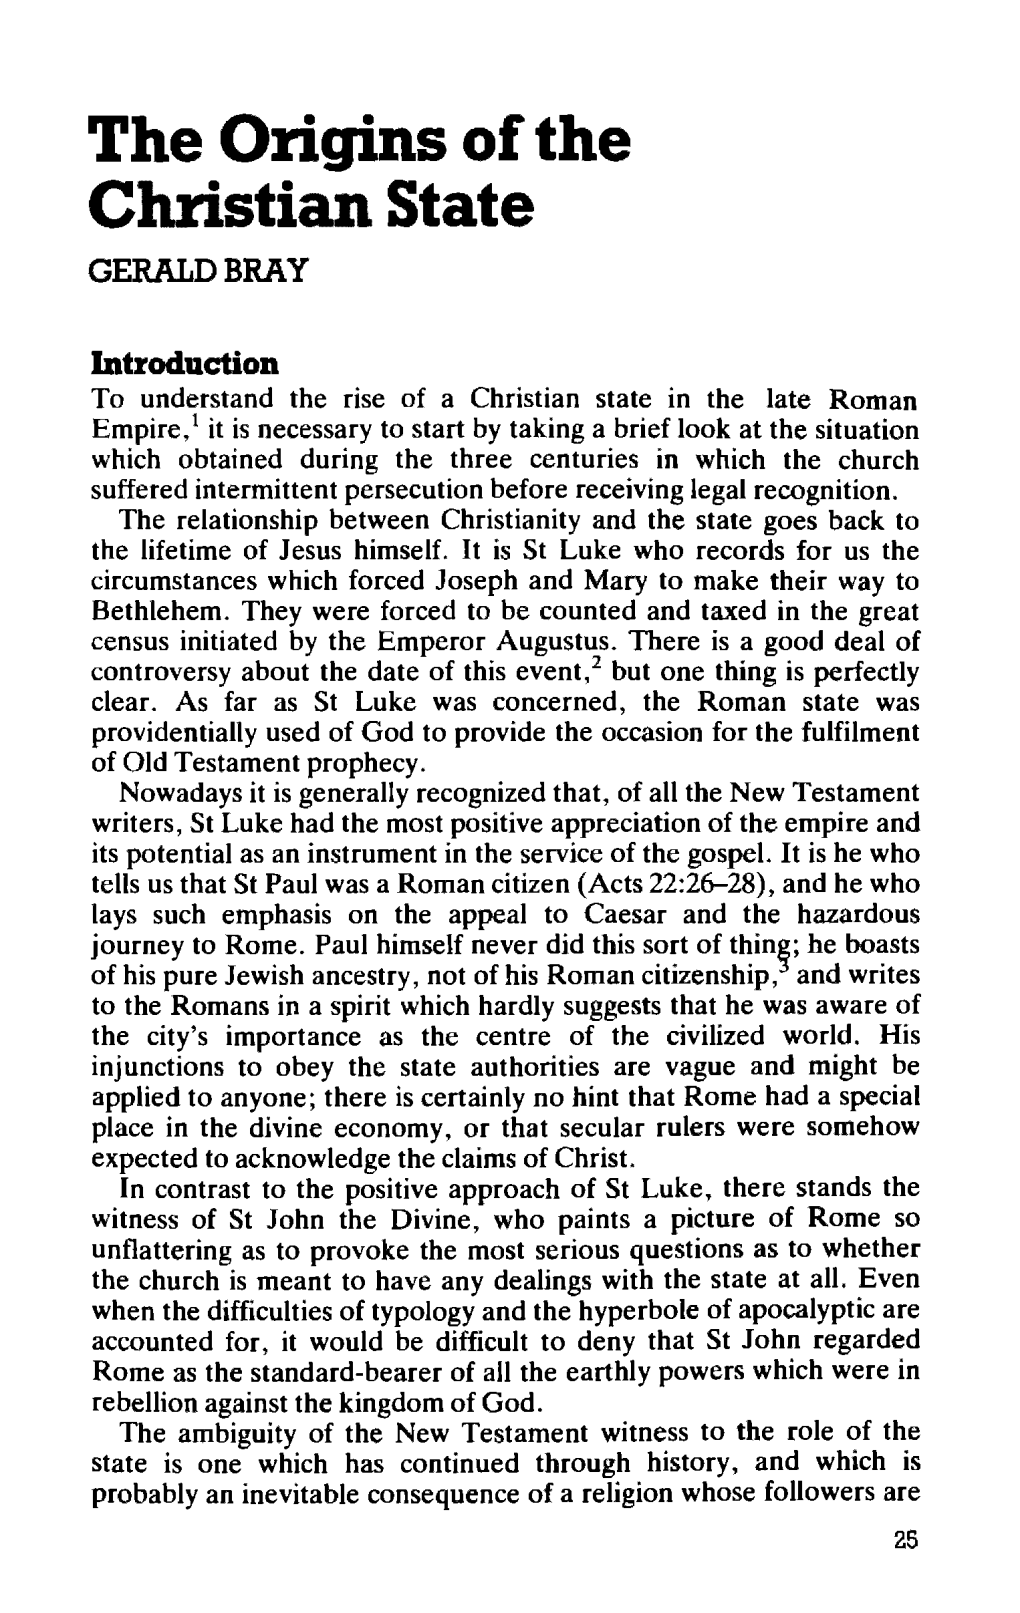 The Origins of the Christian State GERALD BRAY